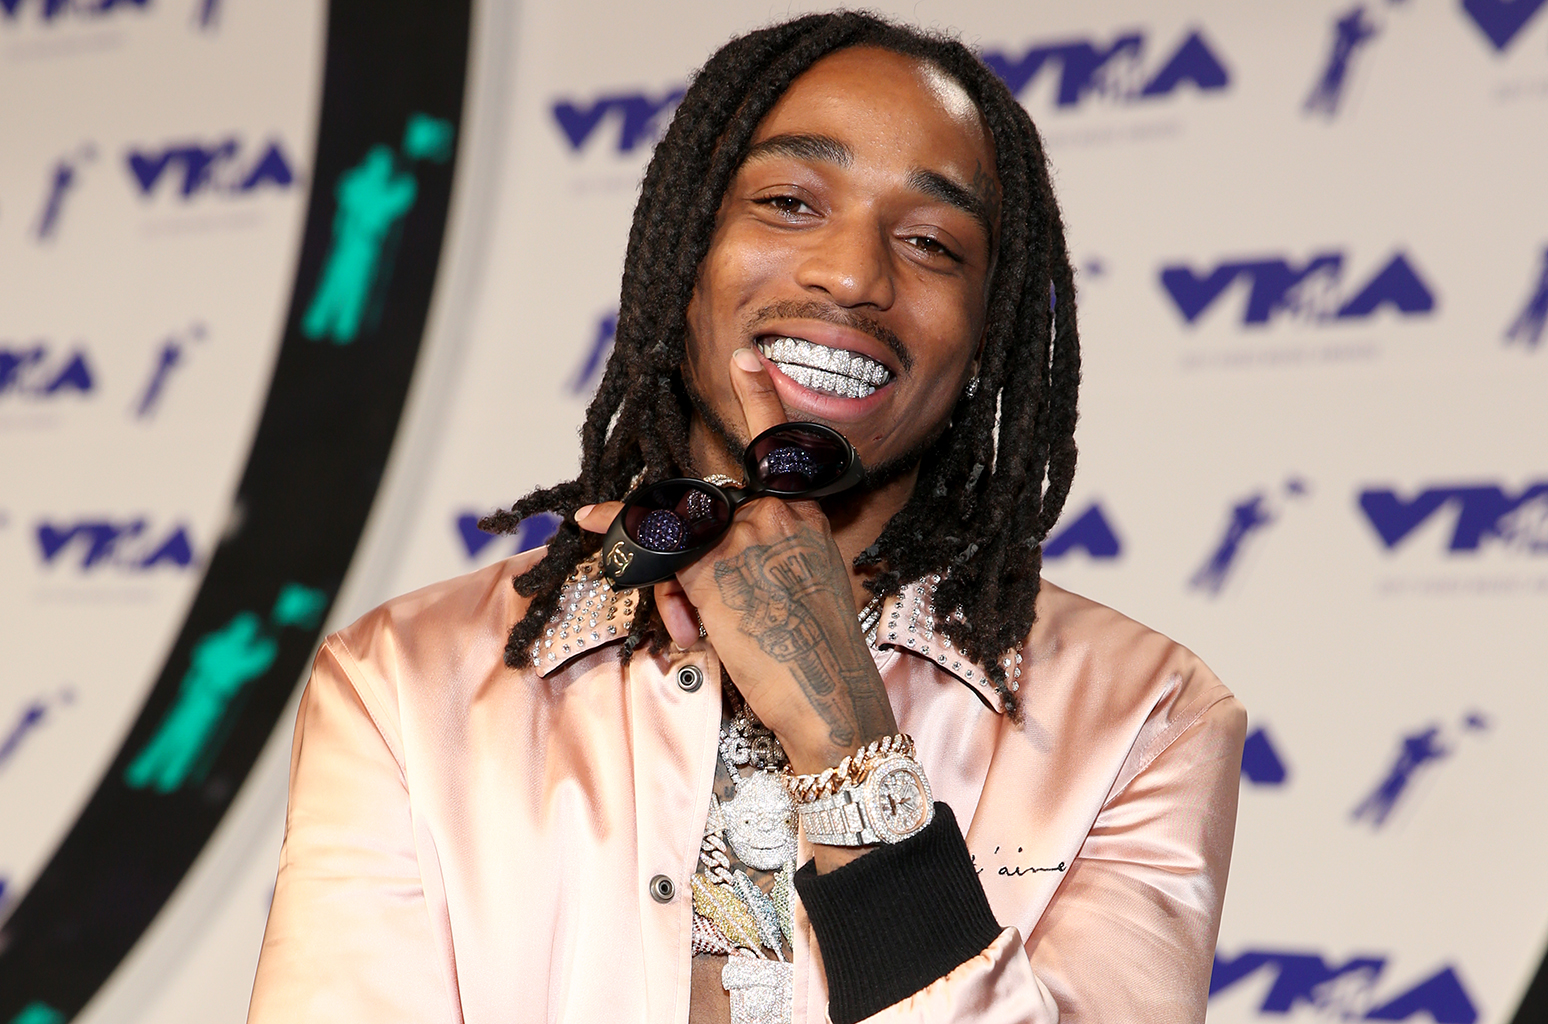 Quavo Drops Off Early Christmas Gifts to Former High School Basketball Team